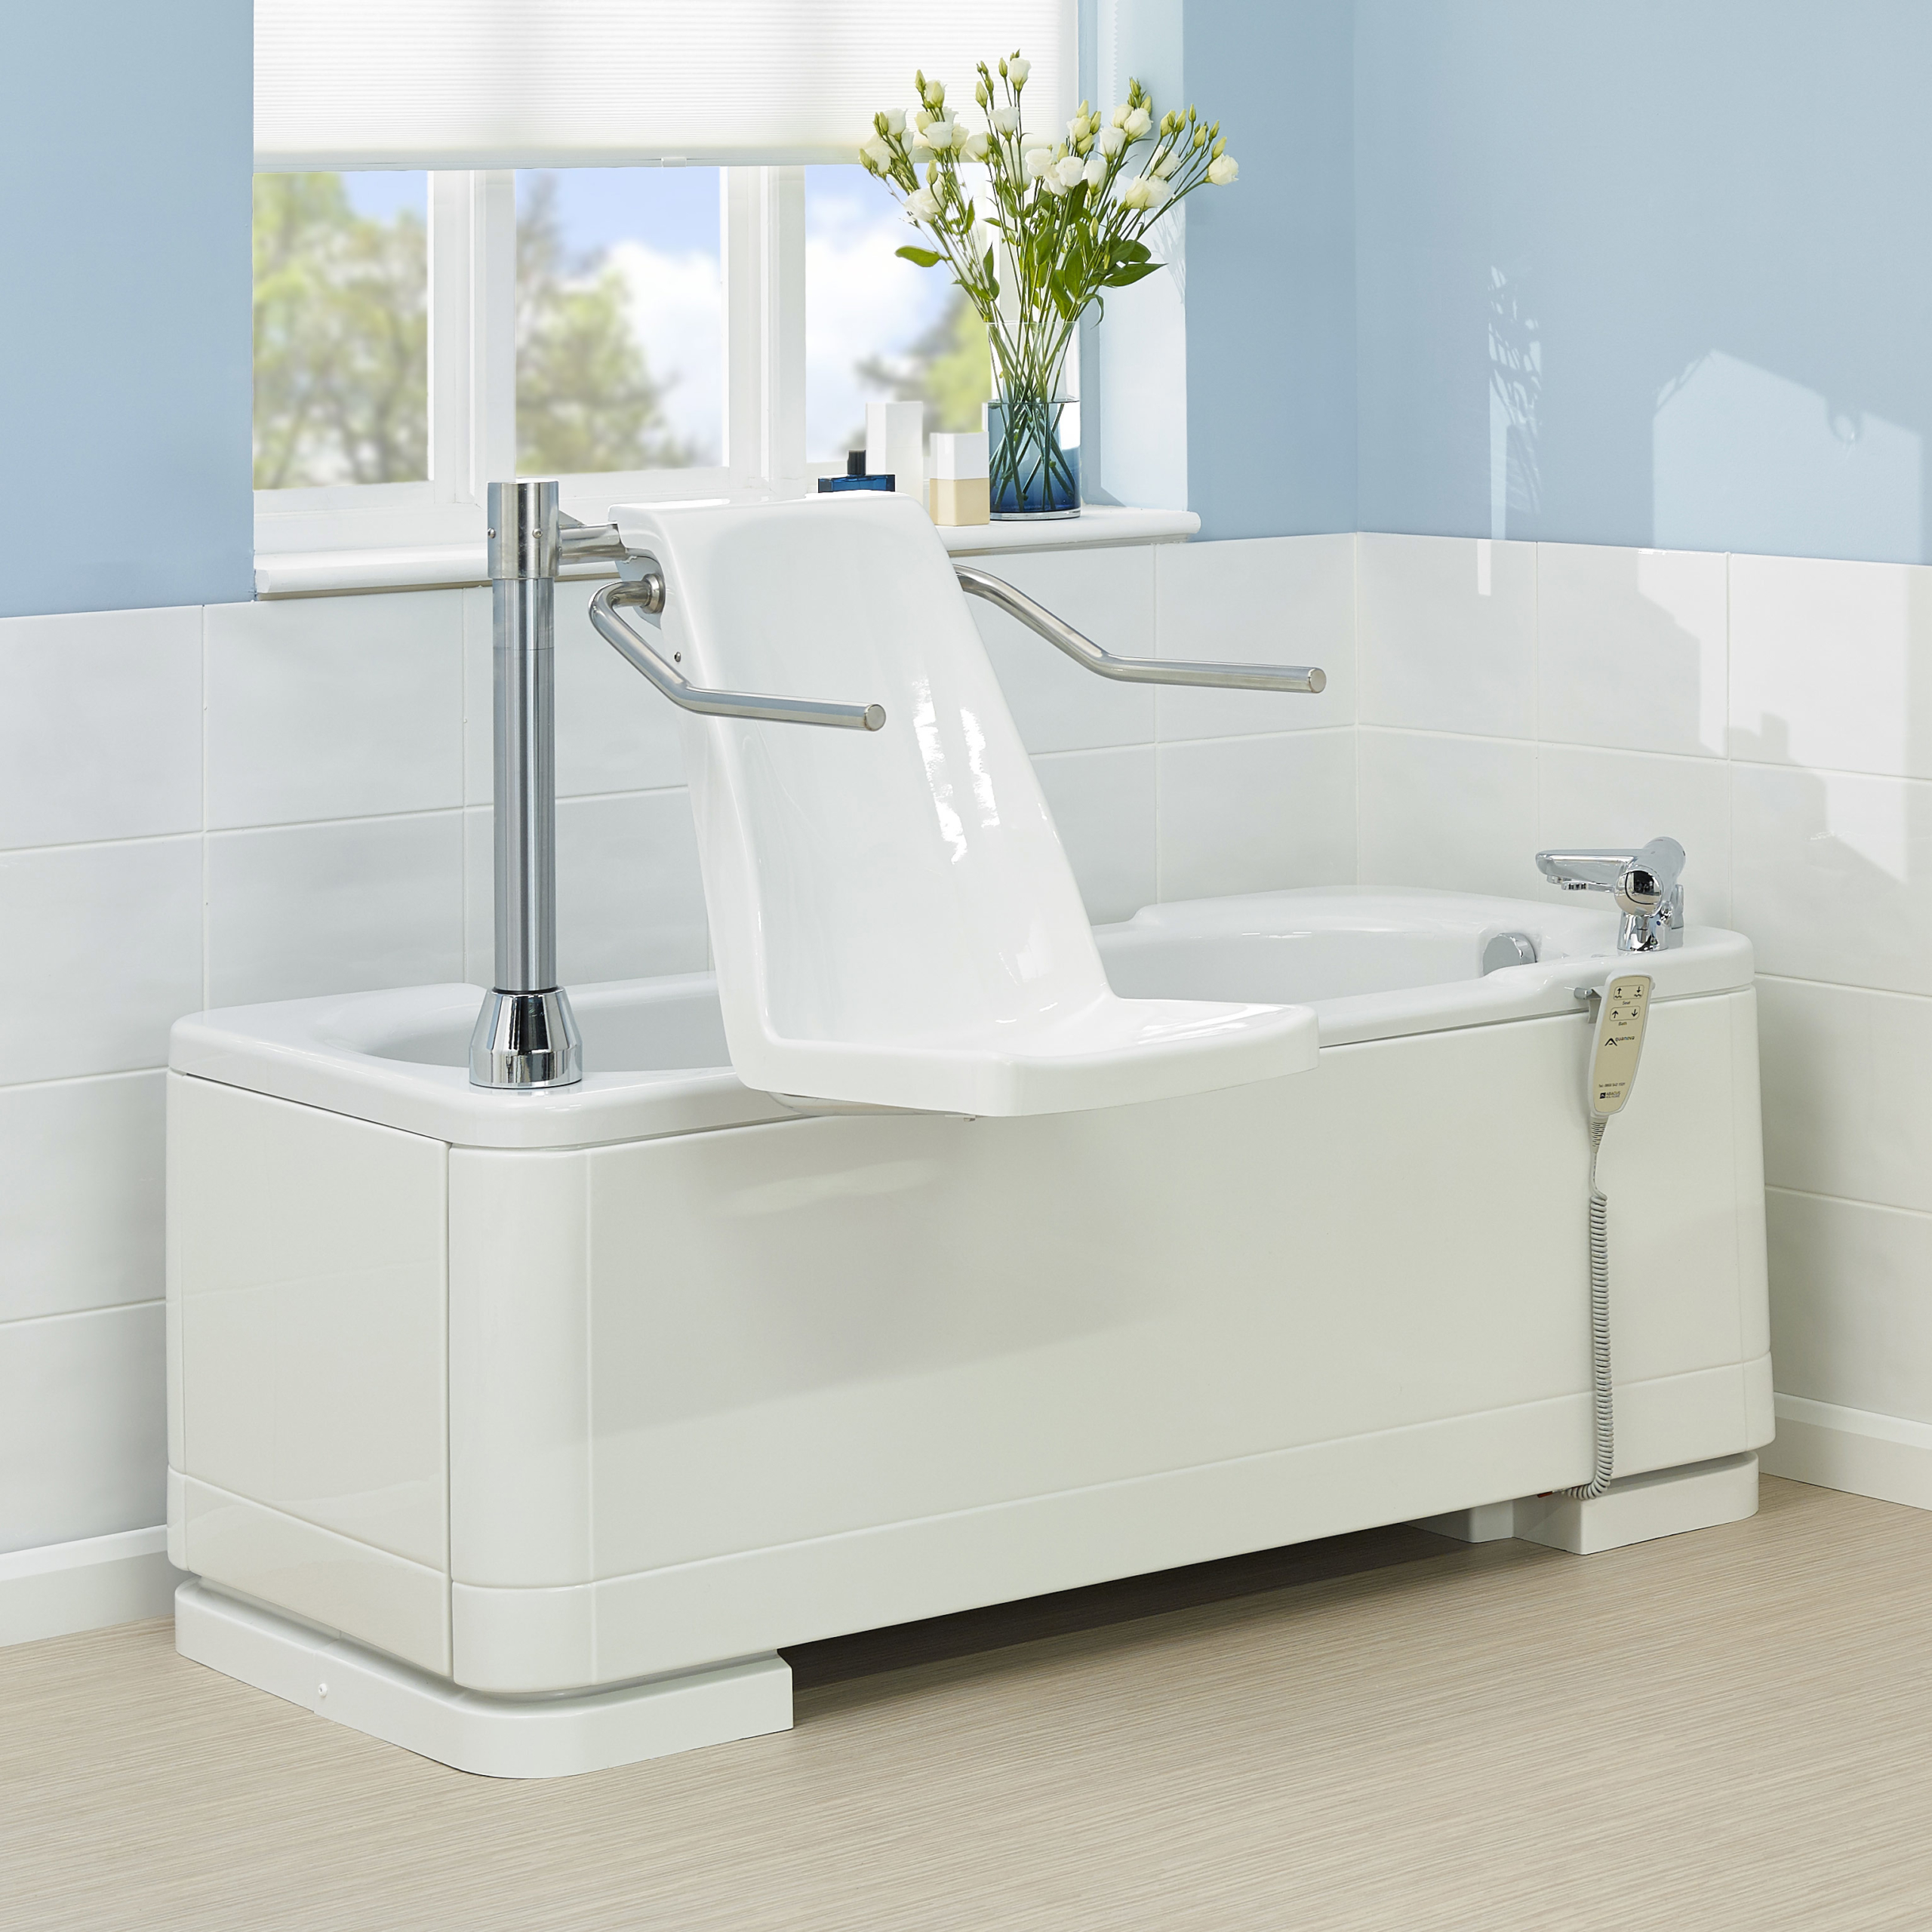 Scorpio 1700 fixed height bath with transfer seat